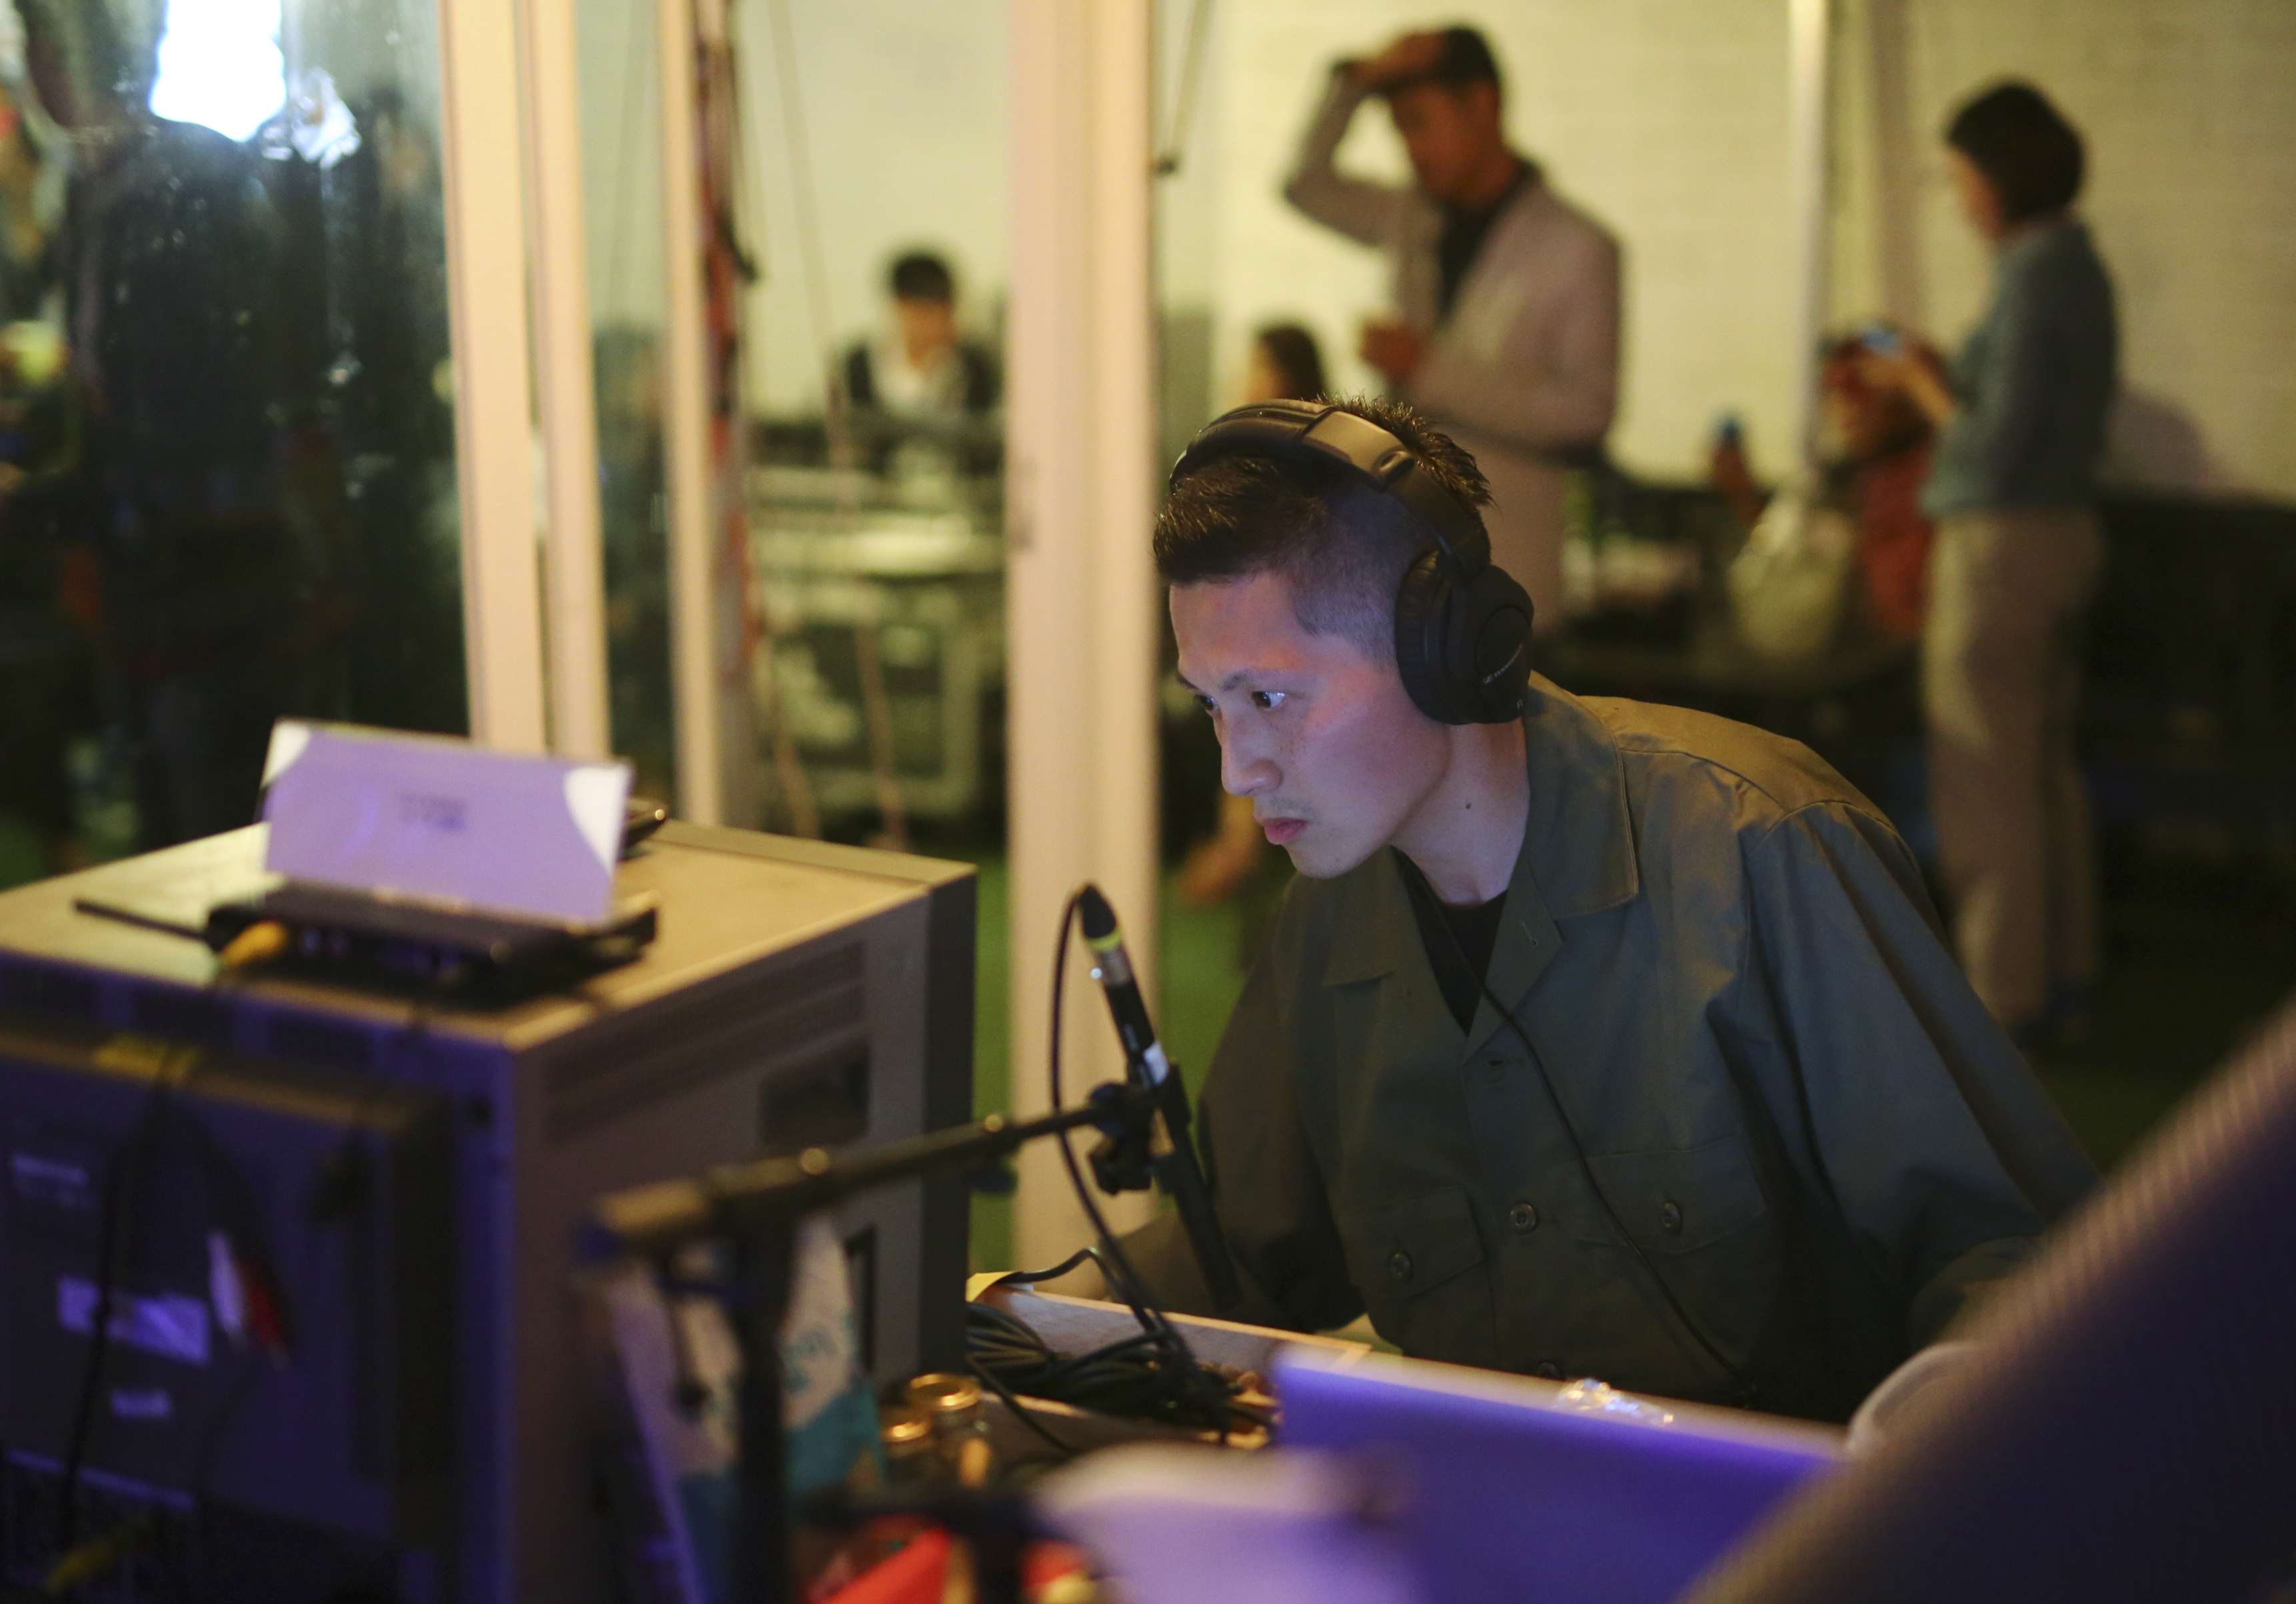 Hong Kong sound artist Samson Young performs his work “Nocturne” in Seoul, in which the recreated sounds of war are broadcast to the audience on hand-held radios. Photo: SCMP Pictures